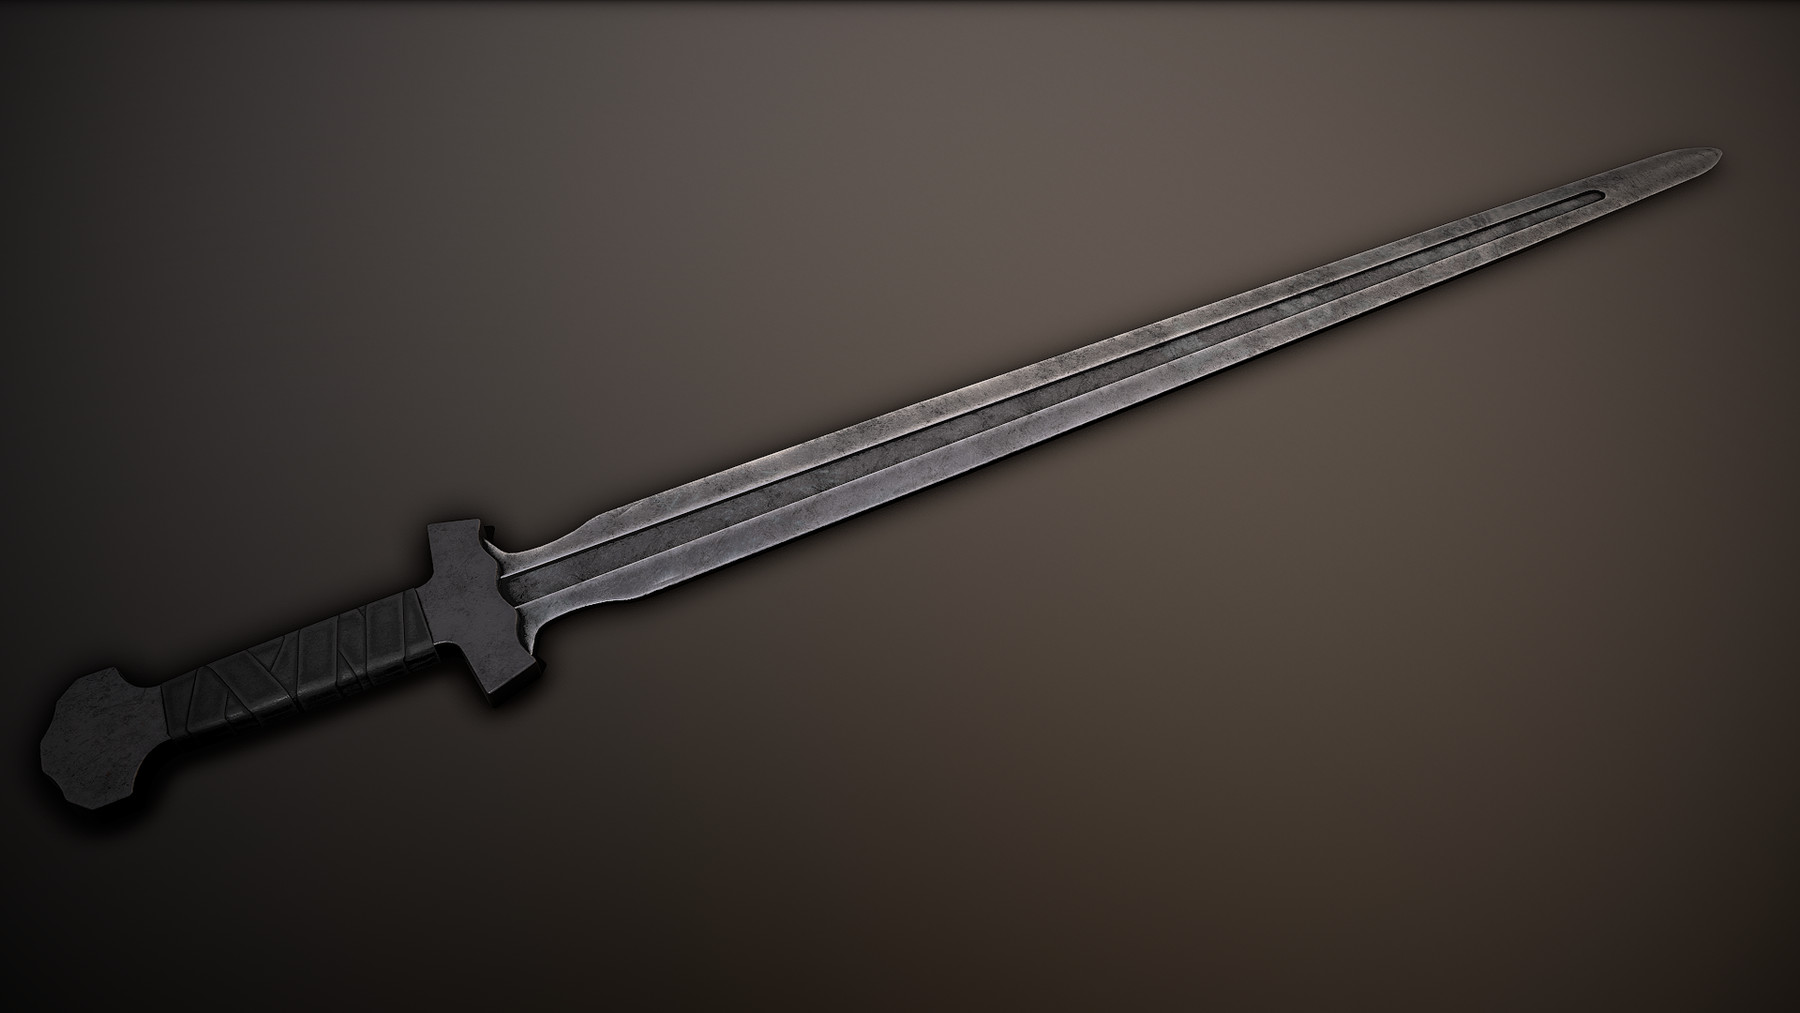 Post-apocalyptic Swords in Weapons - UE Marketplace